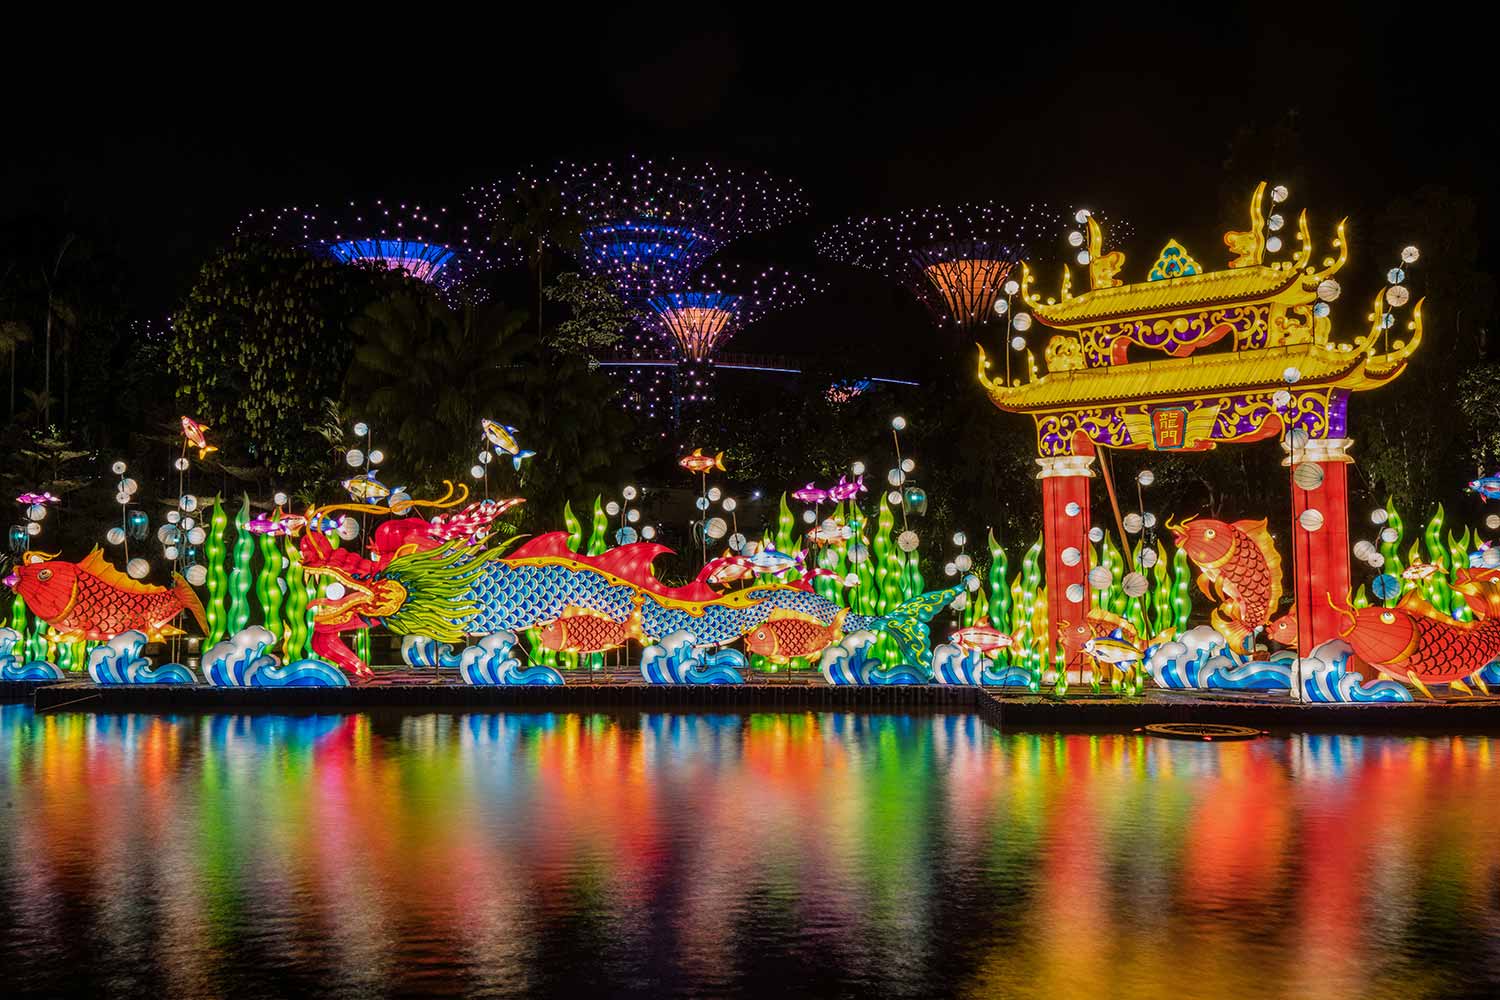 Celebrate Mid-Autumn Festival at Gardens by the Bay with Larger-than-Life Lanterns!